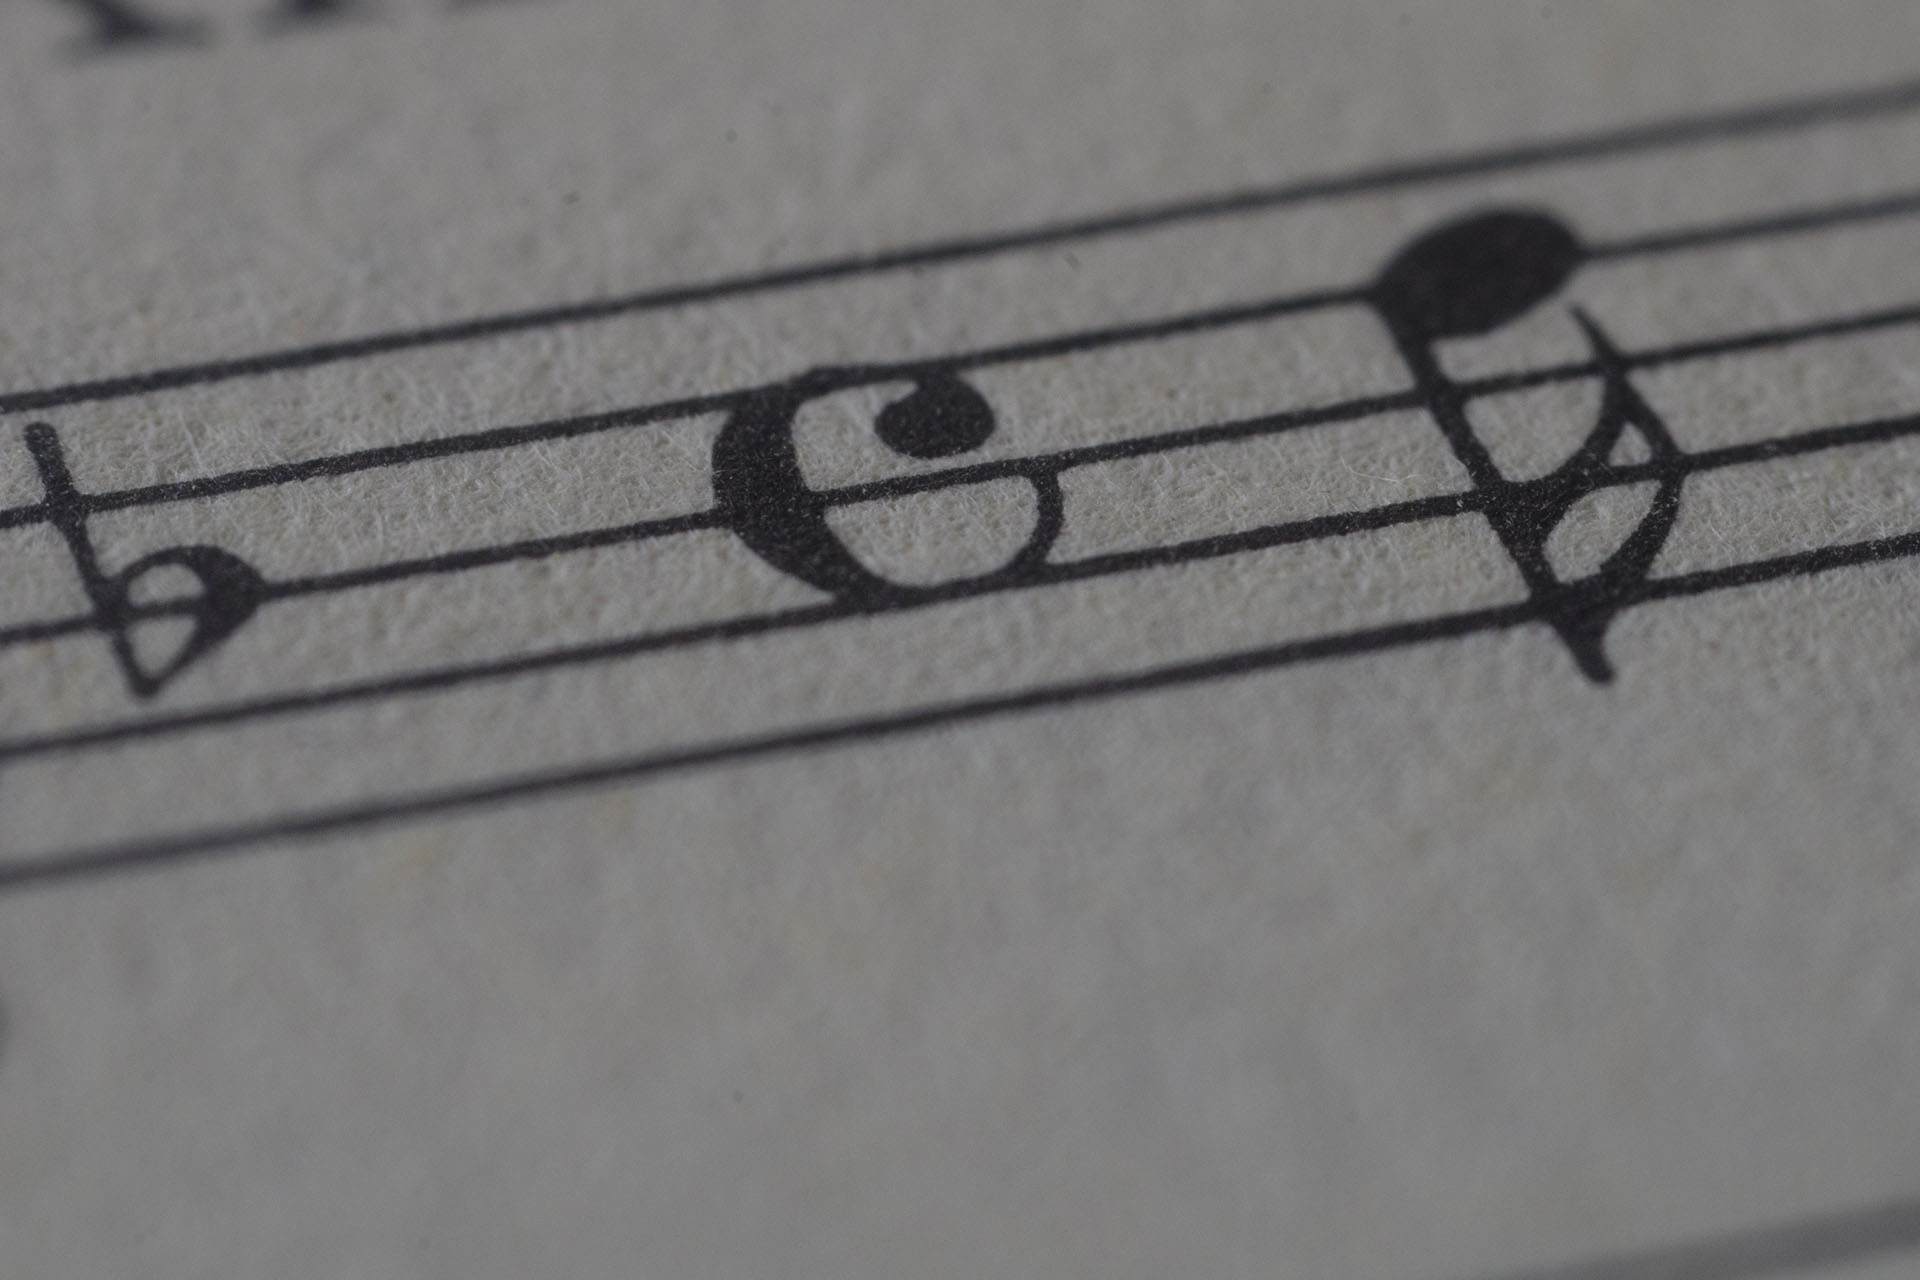 Example of music notes used as title for the musik video